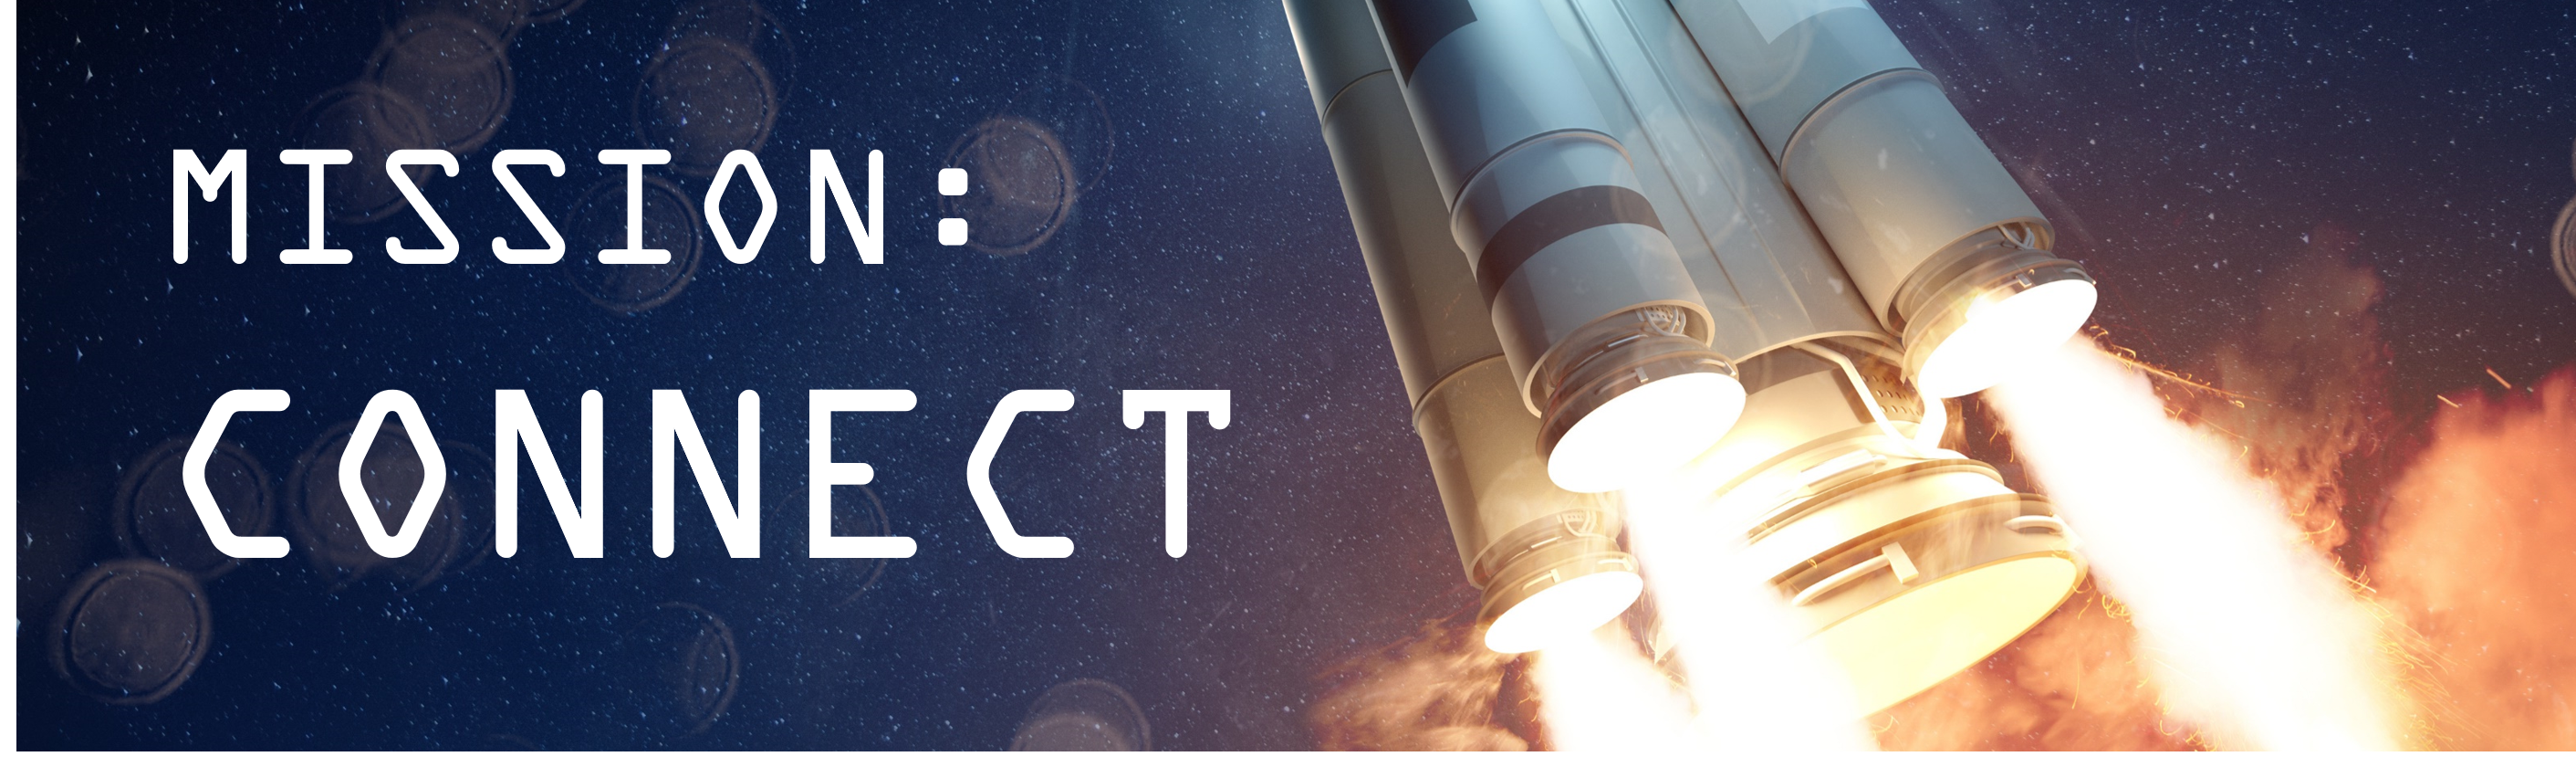 Rocket liftoff: "Mission: Connect"